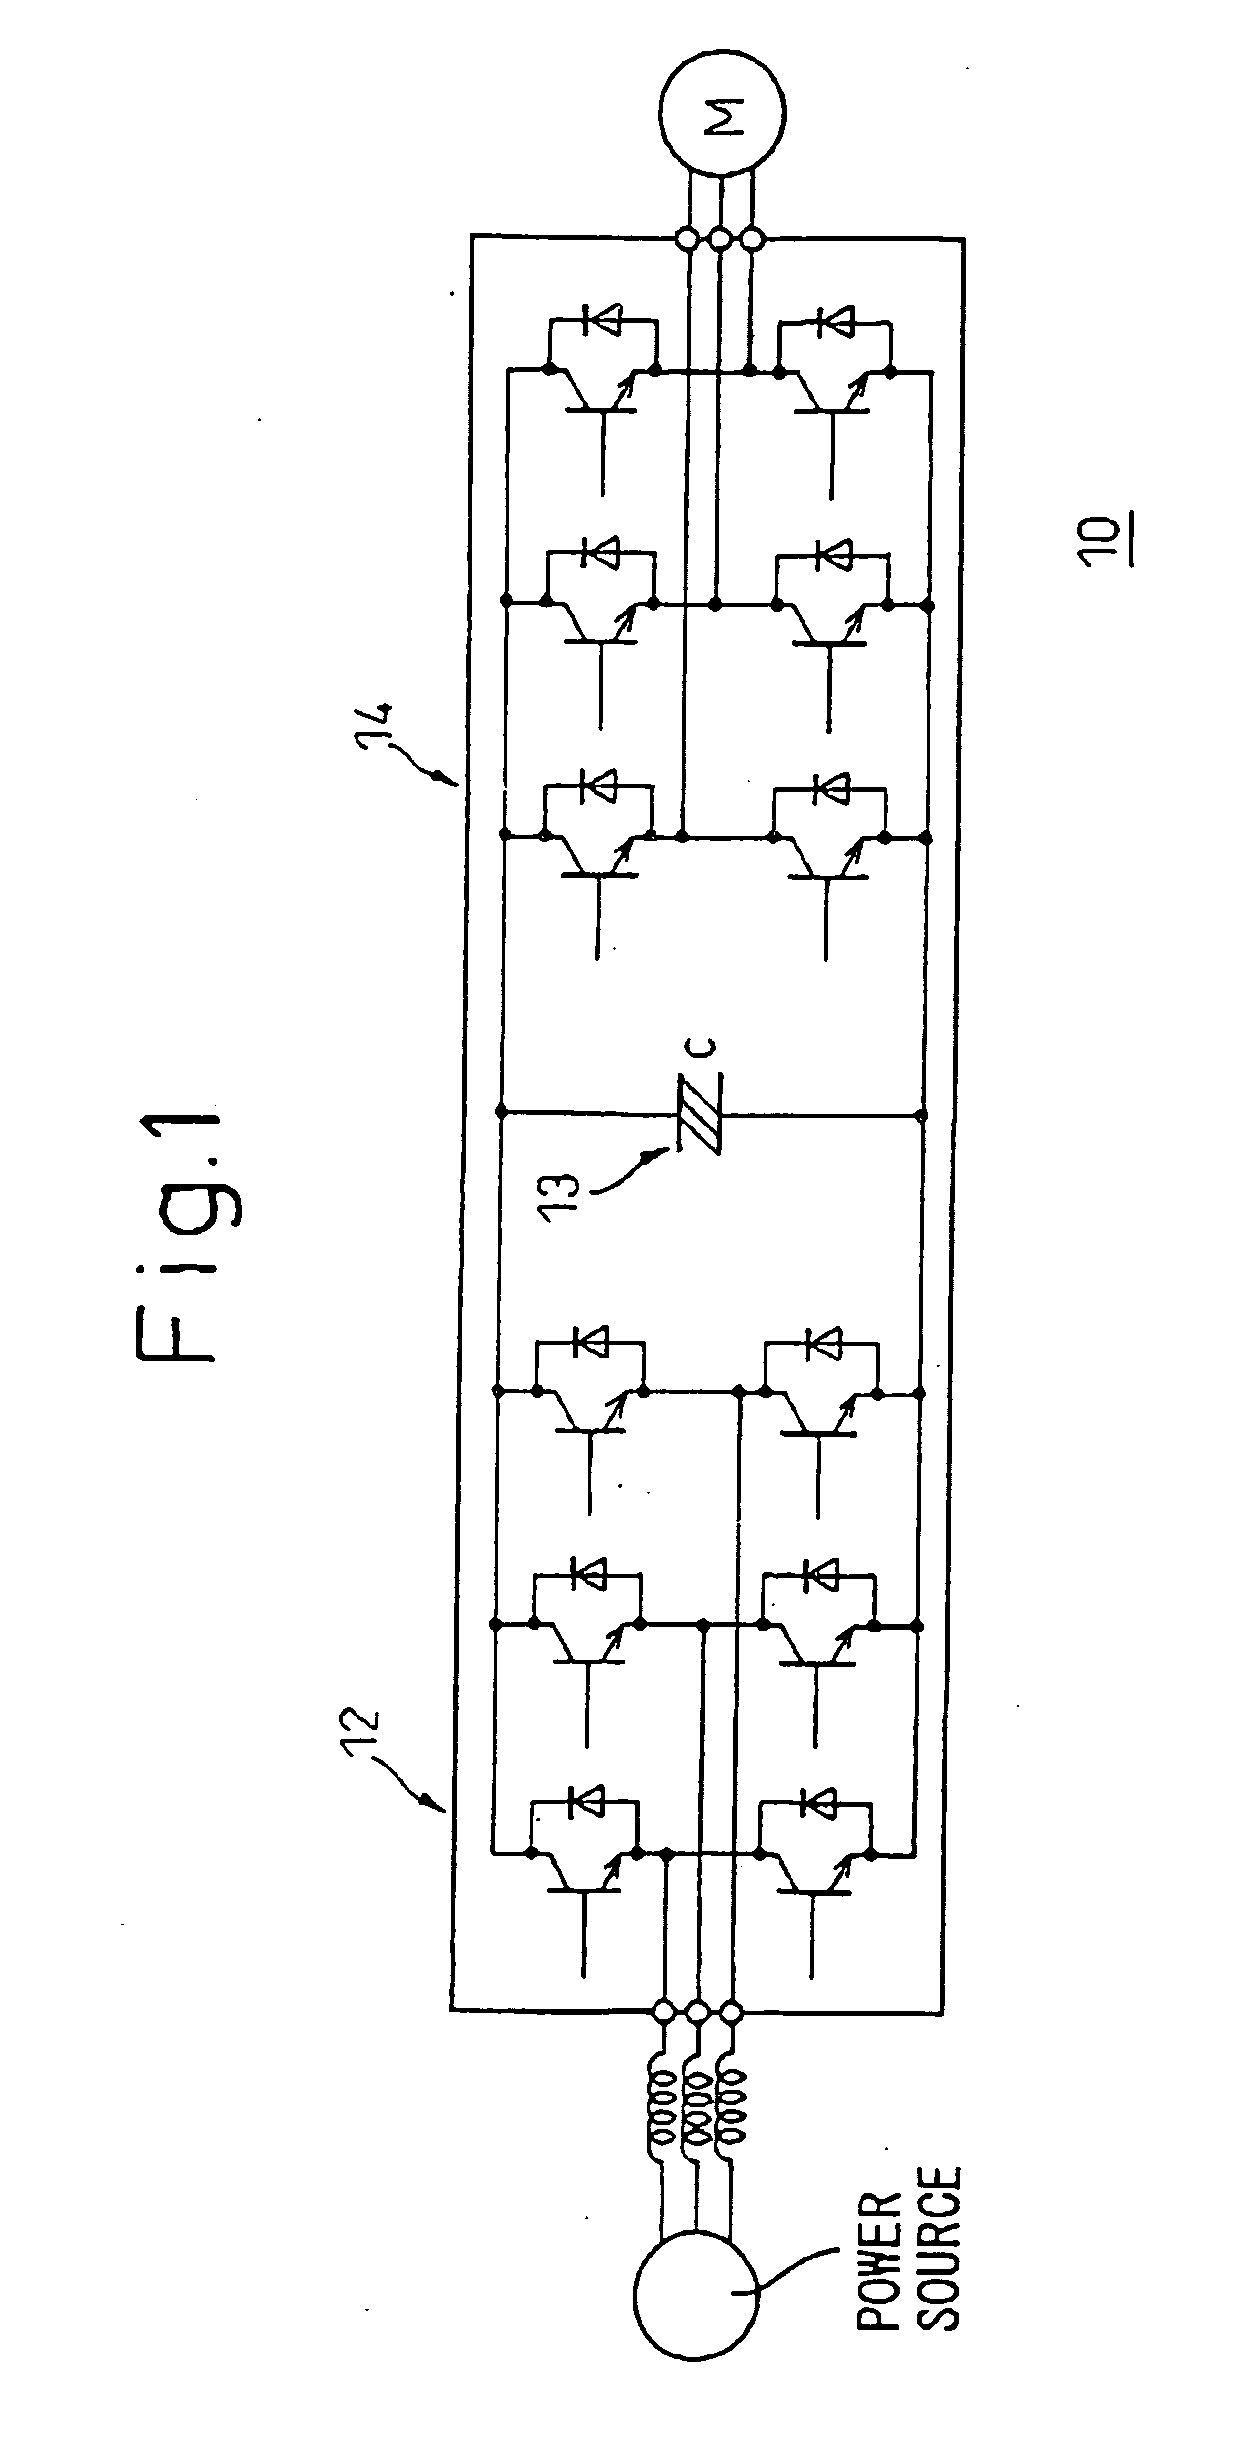 Converter and inverter including converter circuit